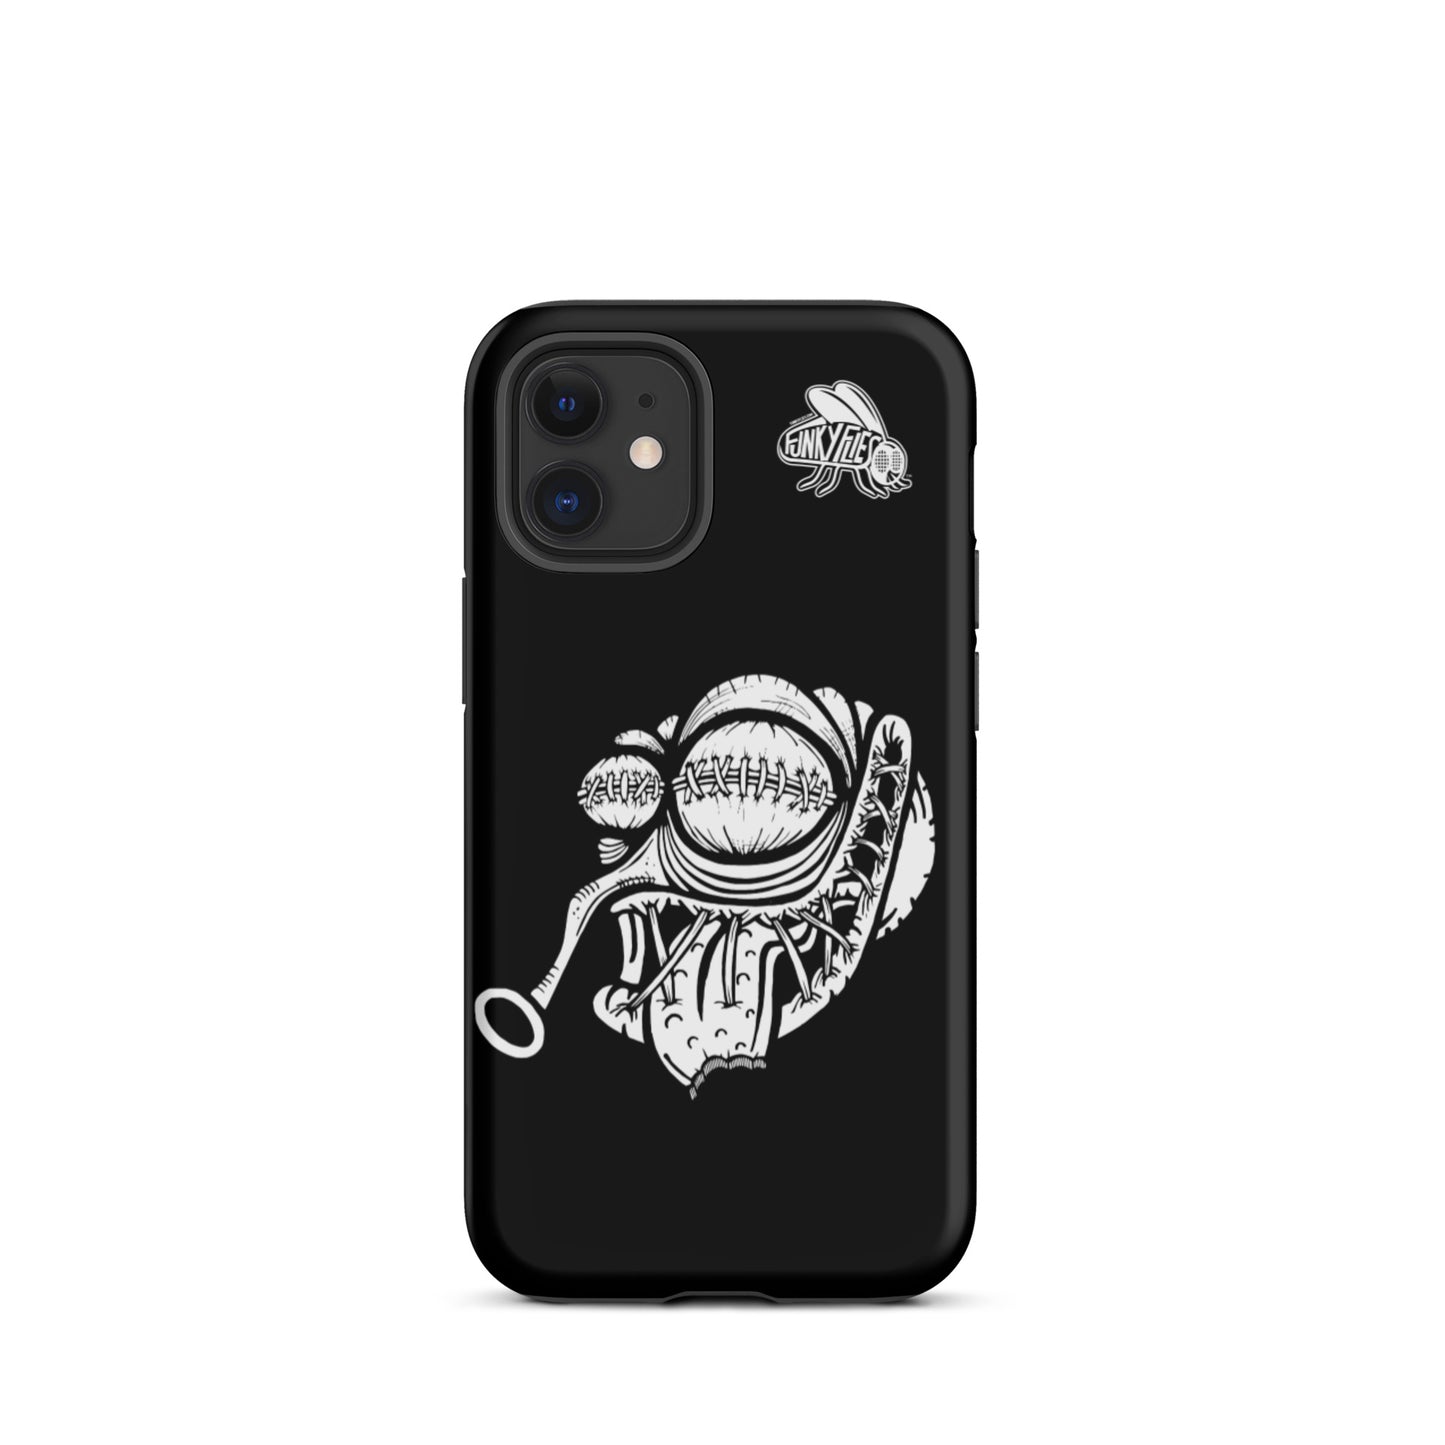 Stitched Fly Tough iPhone case